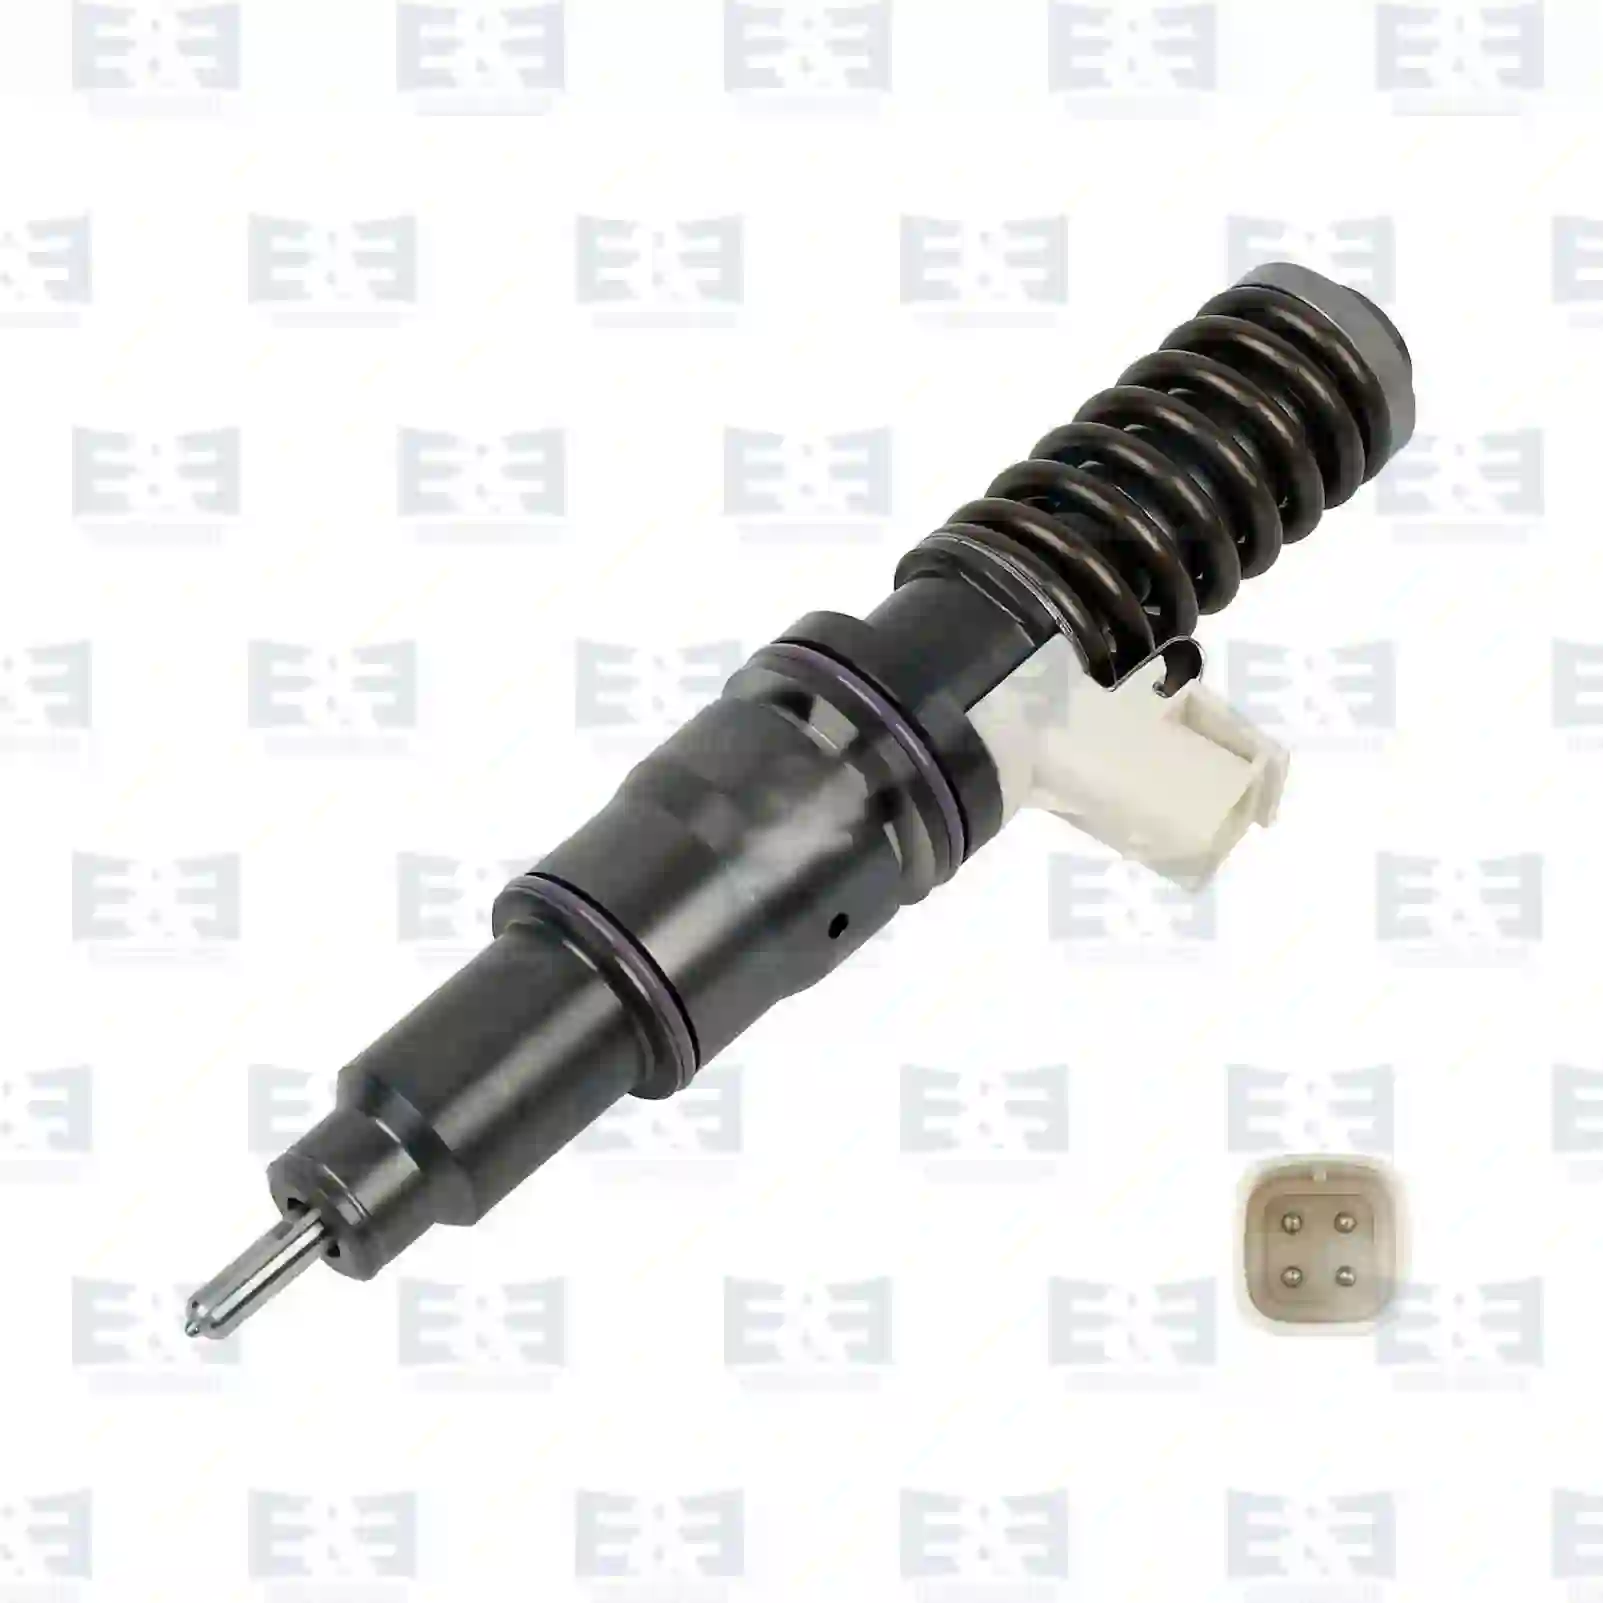 Electronical Injector Unit Unit injector, EE No 2E2286076 ,  oem no:7420747797, 7421582101, 7421644602, 7485003951, 7485009951, 20747797, 21582101, 21644602, 85000674, 85003951, 85006674, 85009951 E&E Truck Spare Parts | Truck Spare Parts, Auotomotive Spare Parts